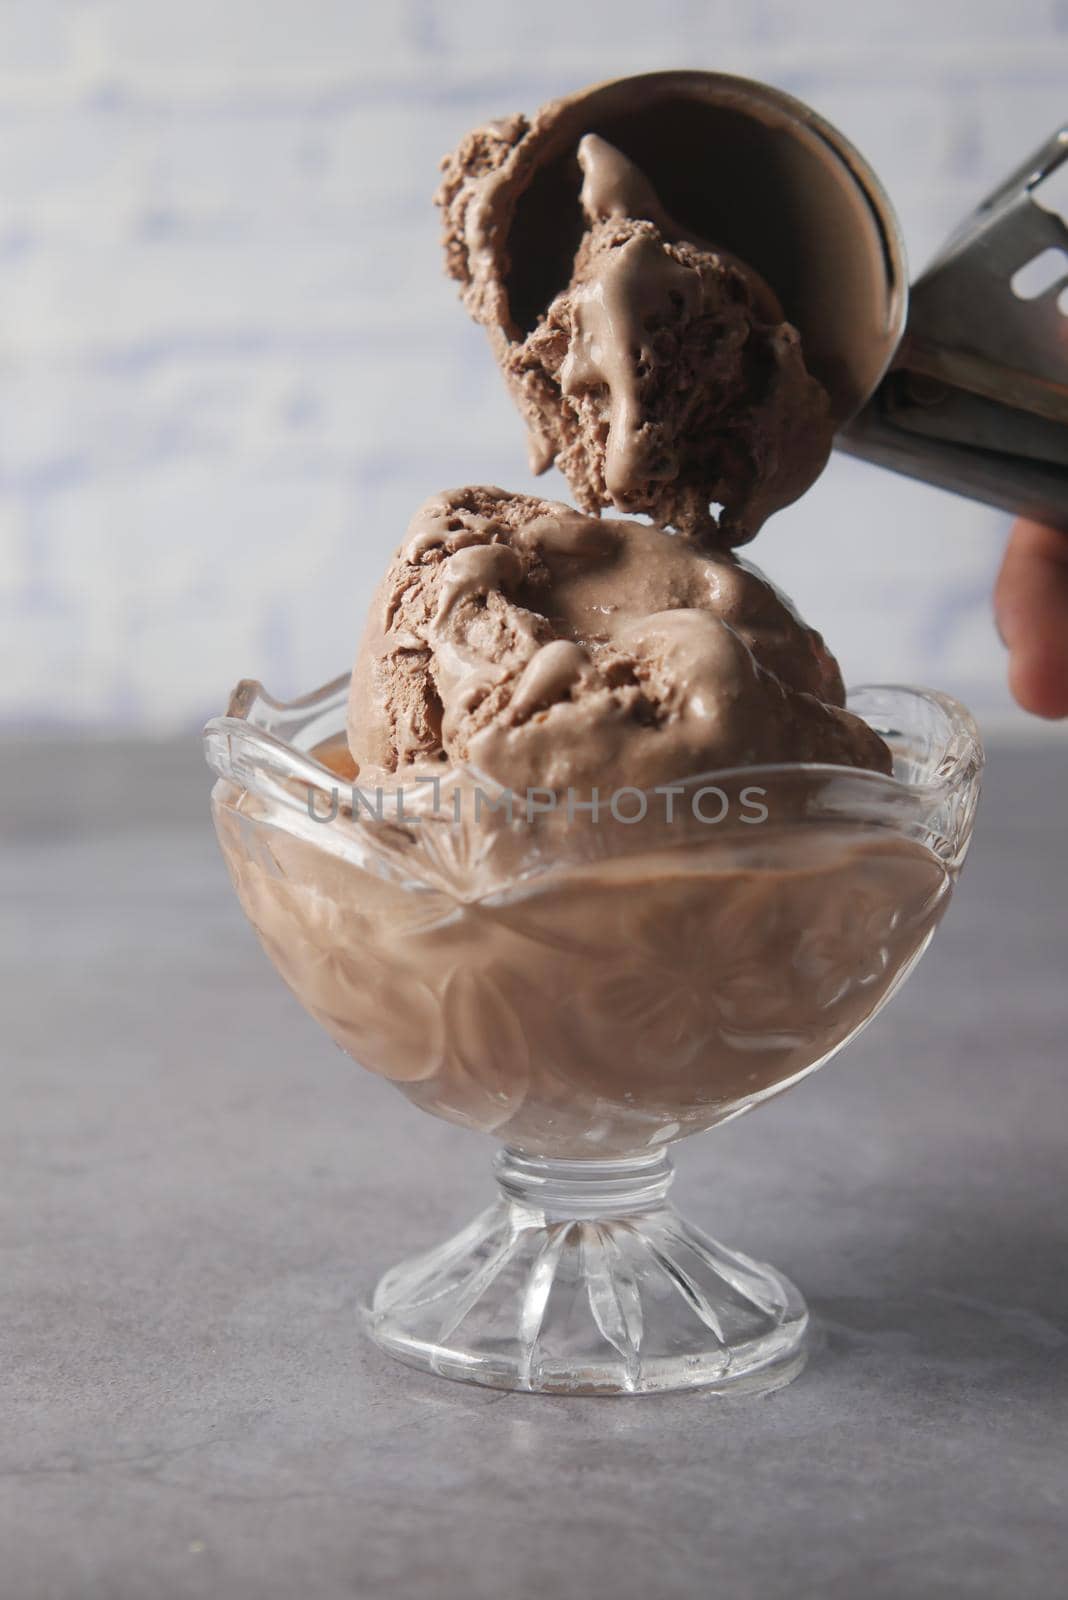 chocolate flavor ice cream in a container by towfiq007